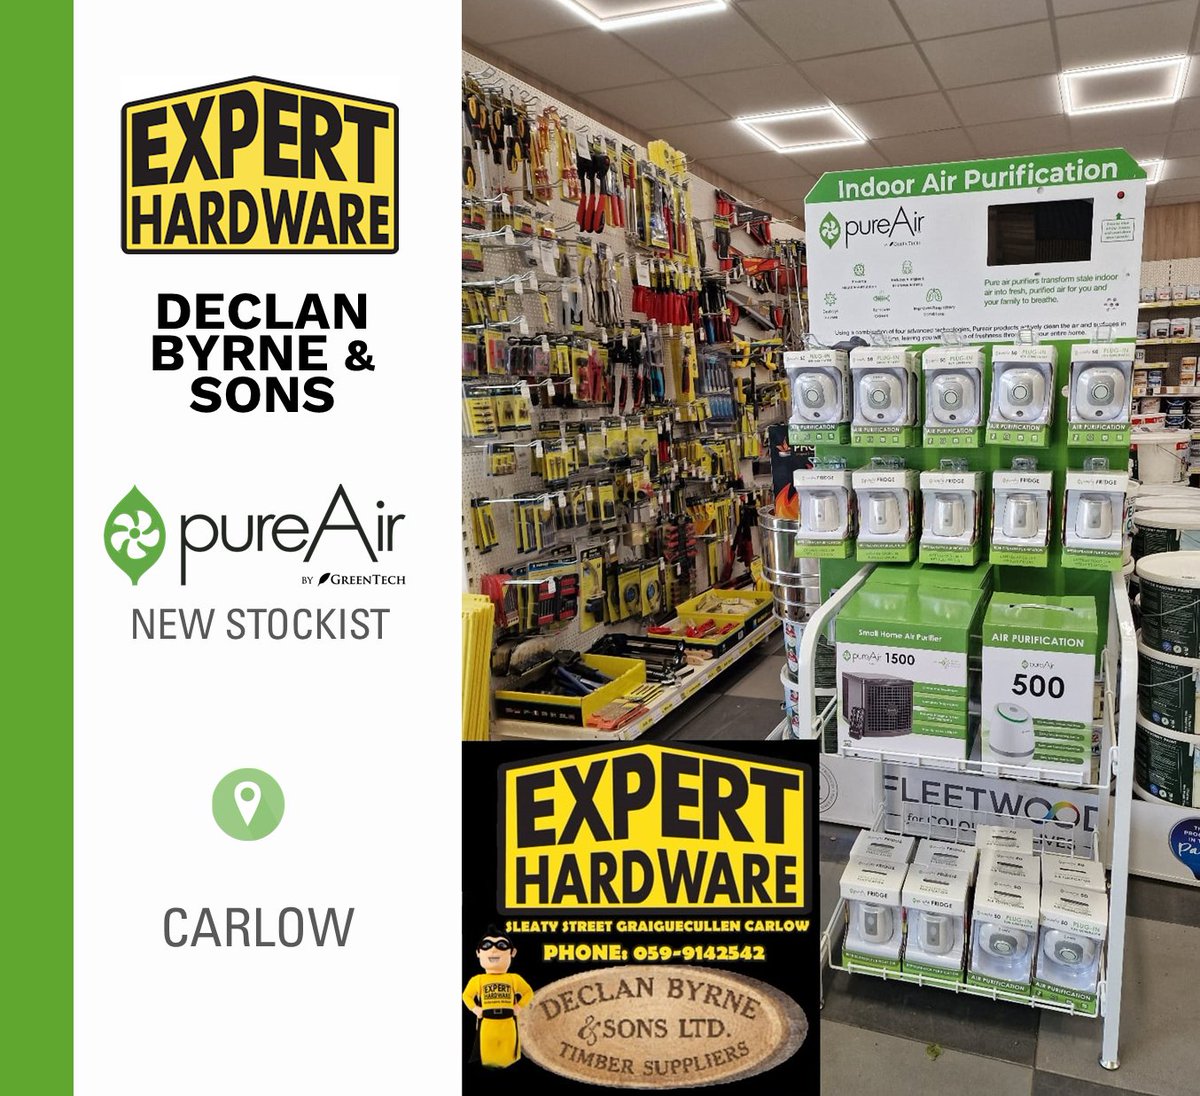 New pureAir Stockist in Carlow 📢 Exciting announcement! Expert Declan Byrne And Sons is now an official stockist of pureAir!🎉

Experience the benefits of breathing cleaner air in 2024! Don't miss out on this opportunity to improve your indoor air quality #pureAir #cleanair